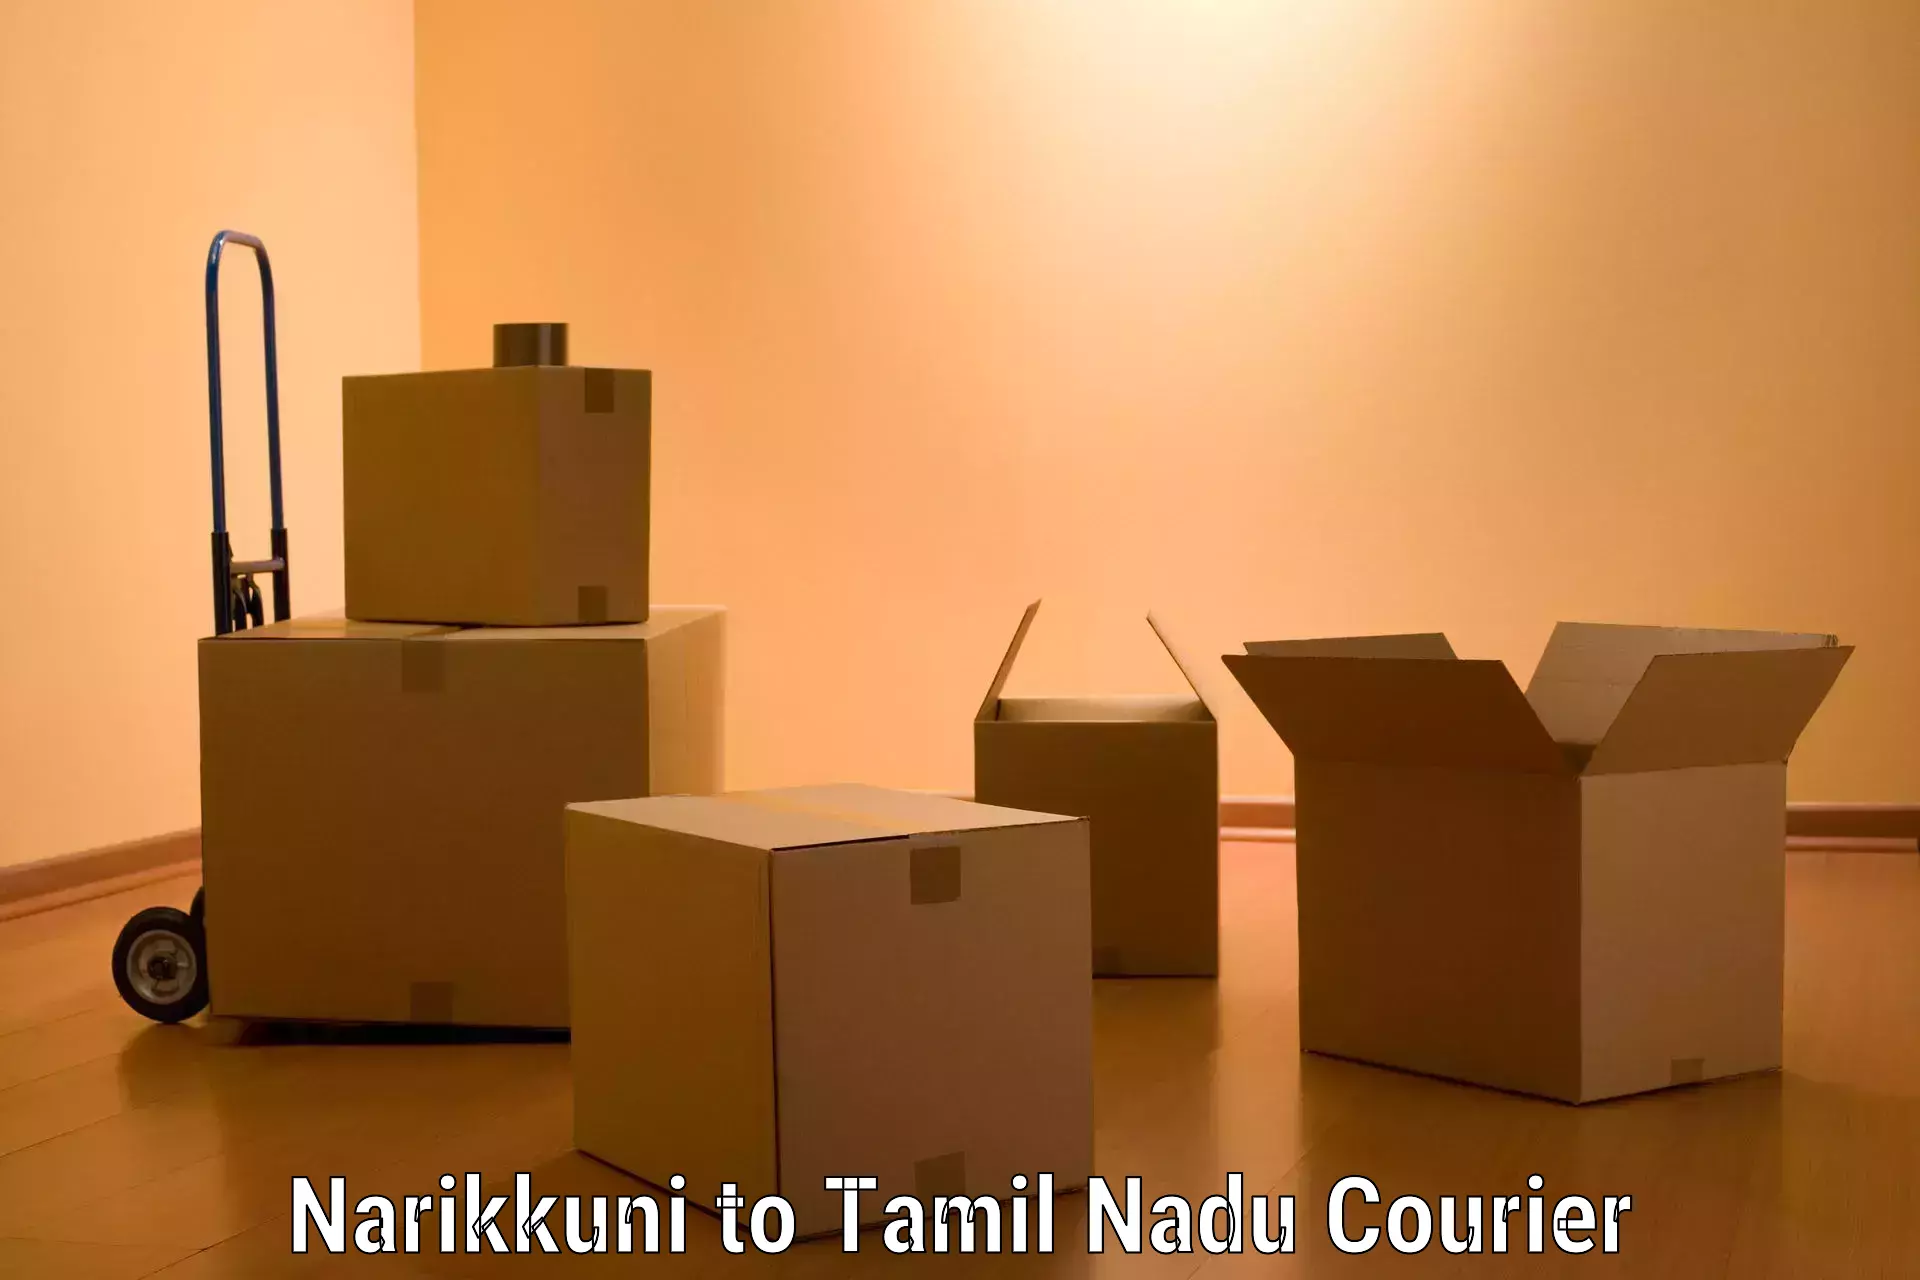 Budget-friendly movers Narikkuni to Shanmugha Arts Science Technology and Research Academy Thanjavur